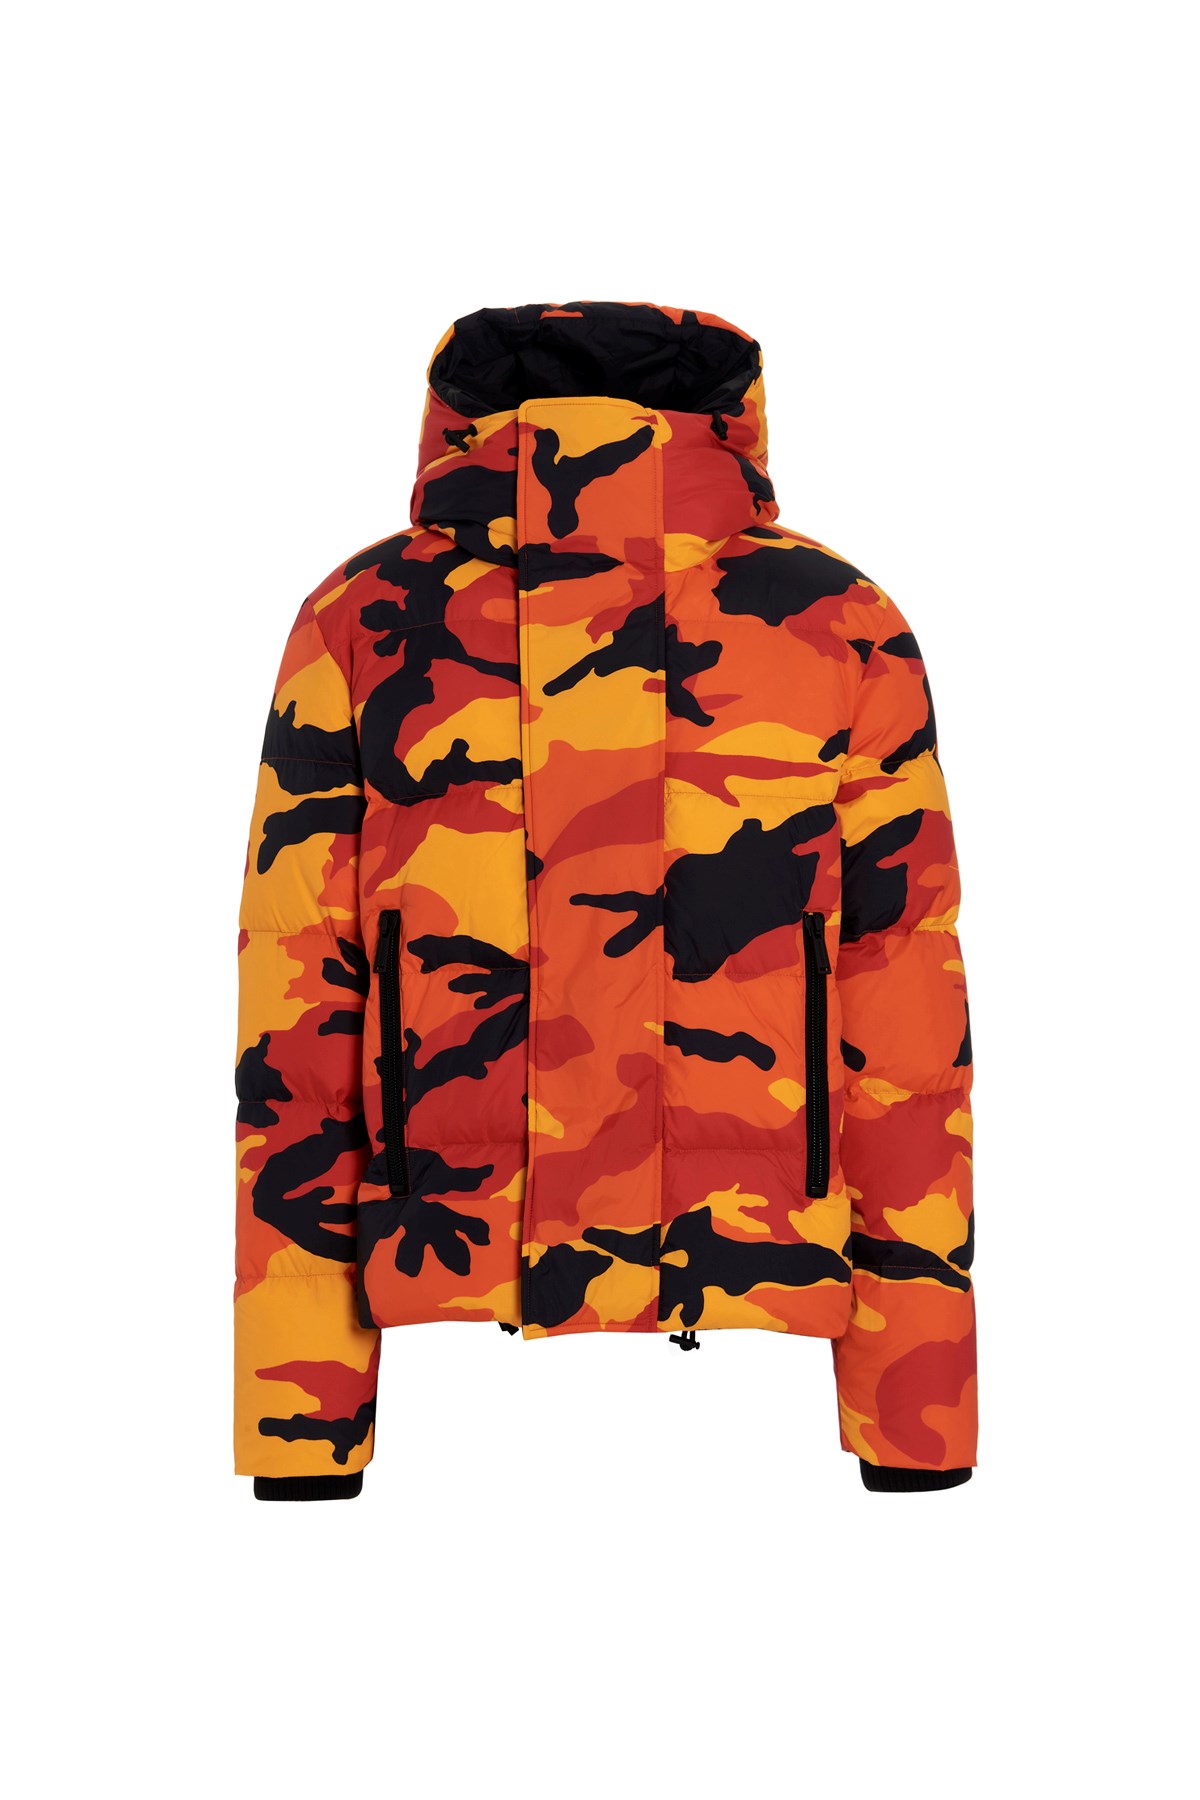 DSQUARED2 Camouflage Print Down Jacket